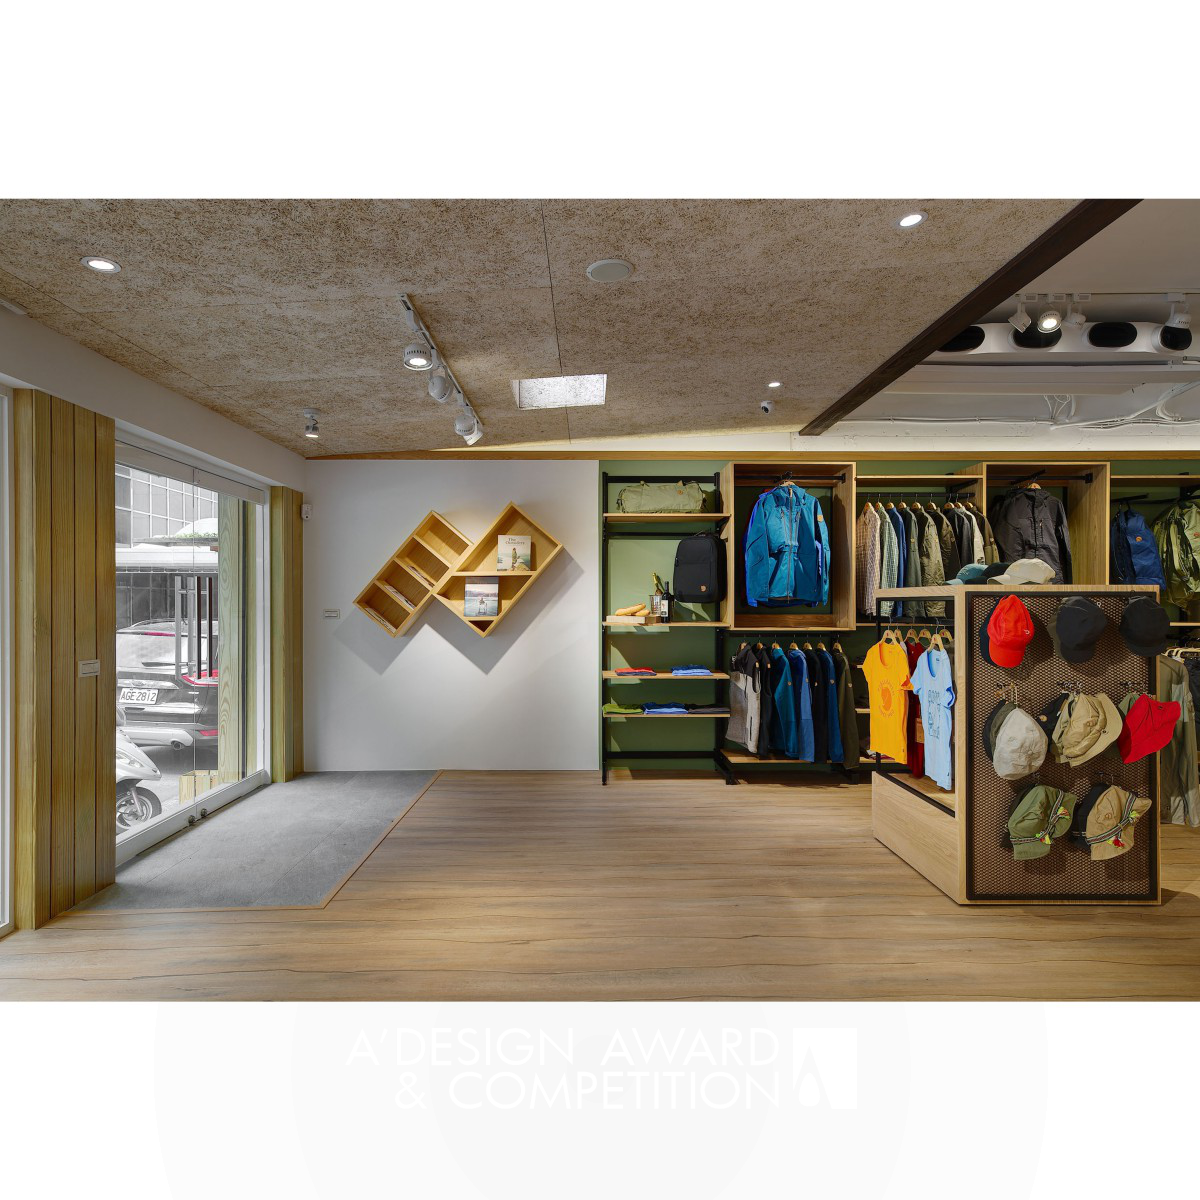 Hiking Store Interior by Chao-Hsin Chen